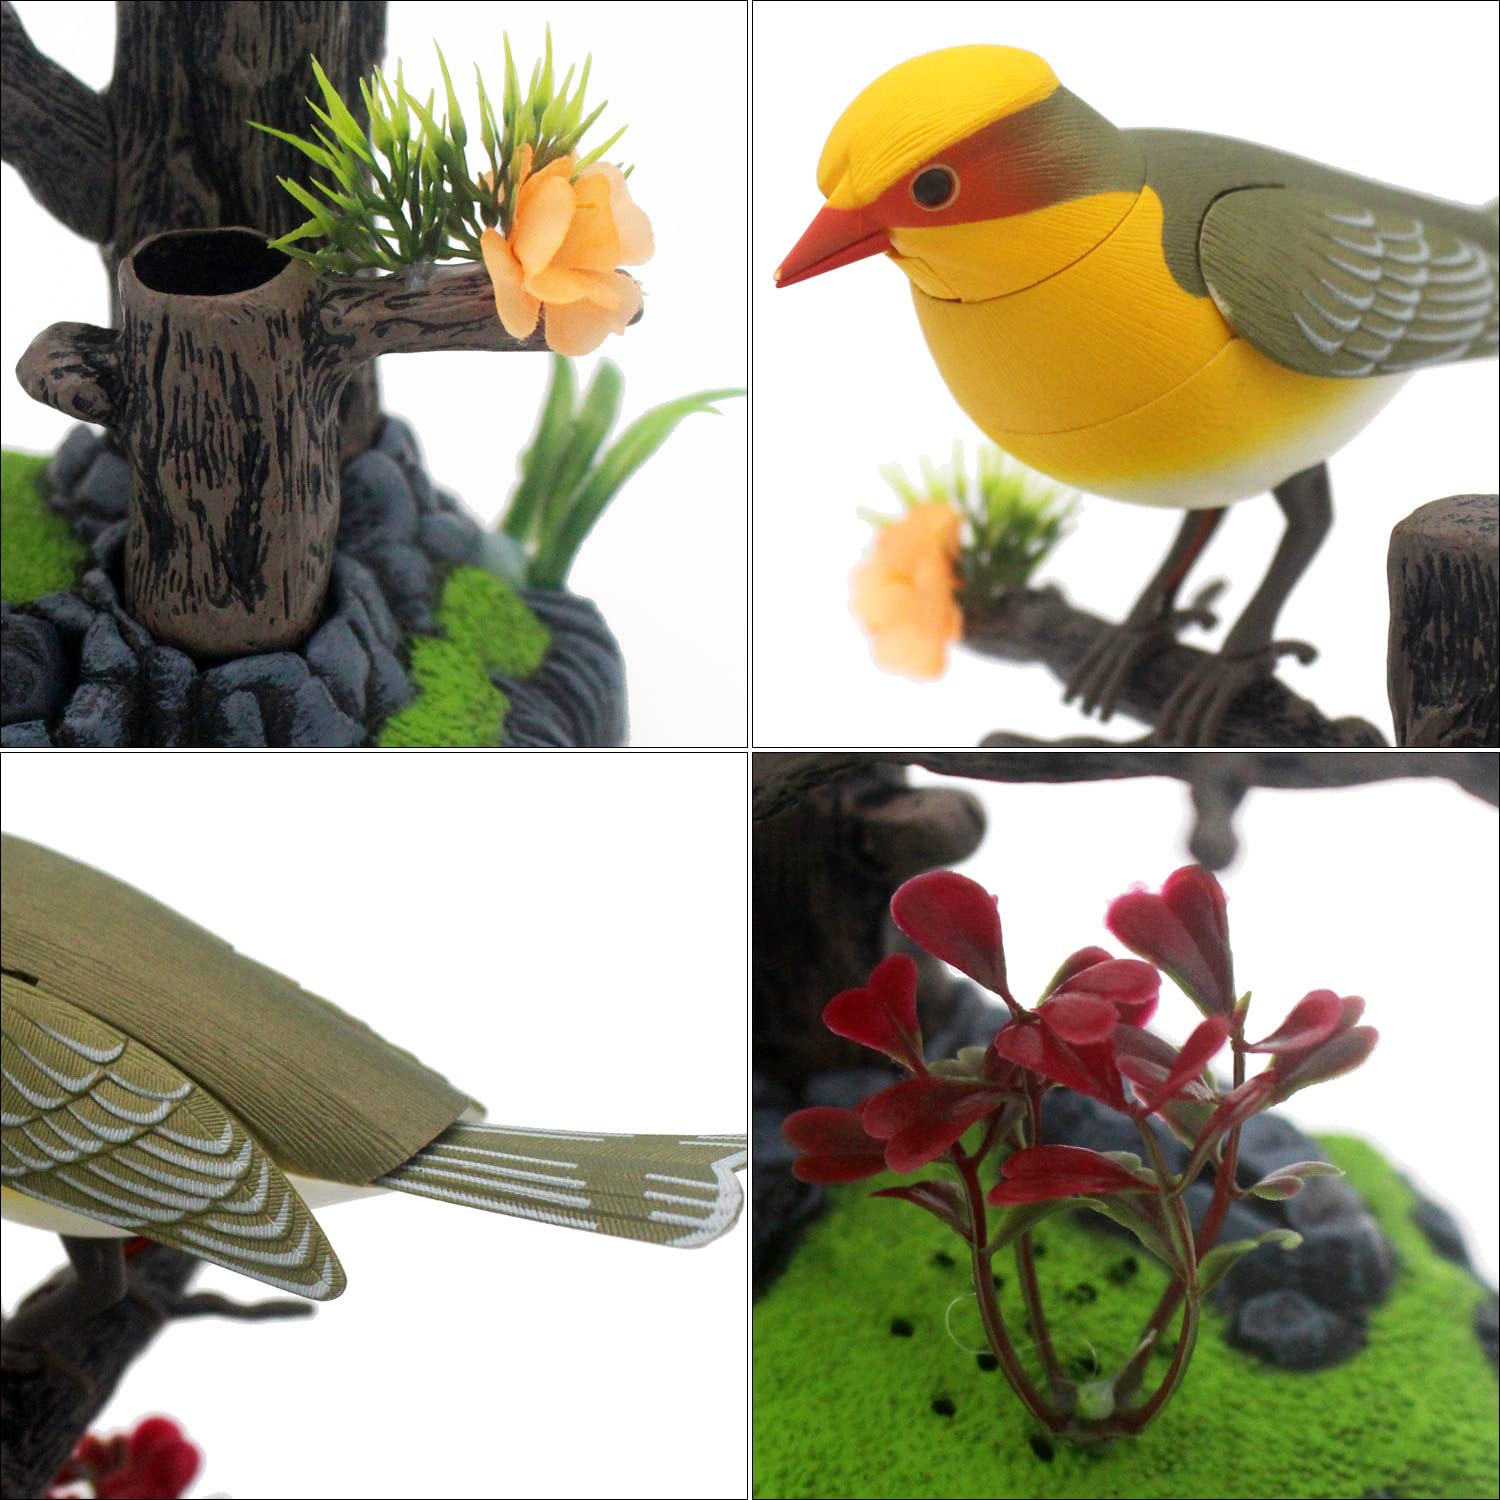 Tipmant Cute Electronic Pets Simulation Sparrow Bird Can Move Chirp Pen Holders Office Home Decor Ornament Kids Toys Birthday Gifts